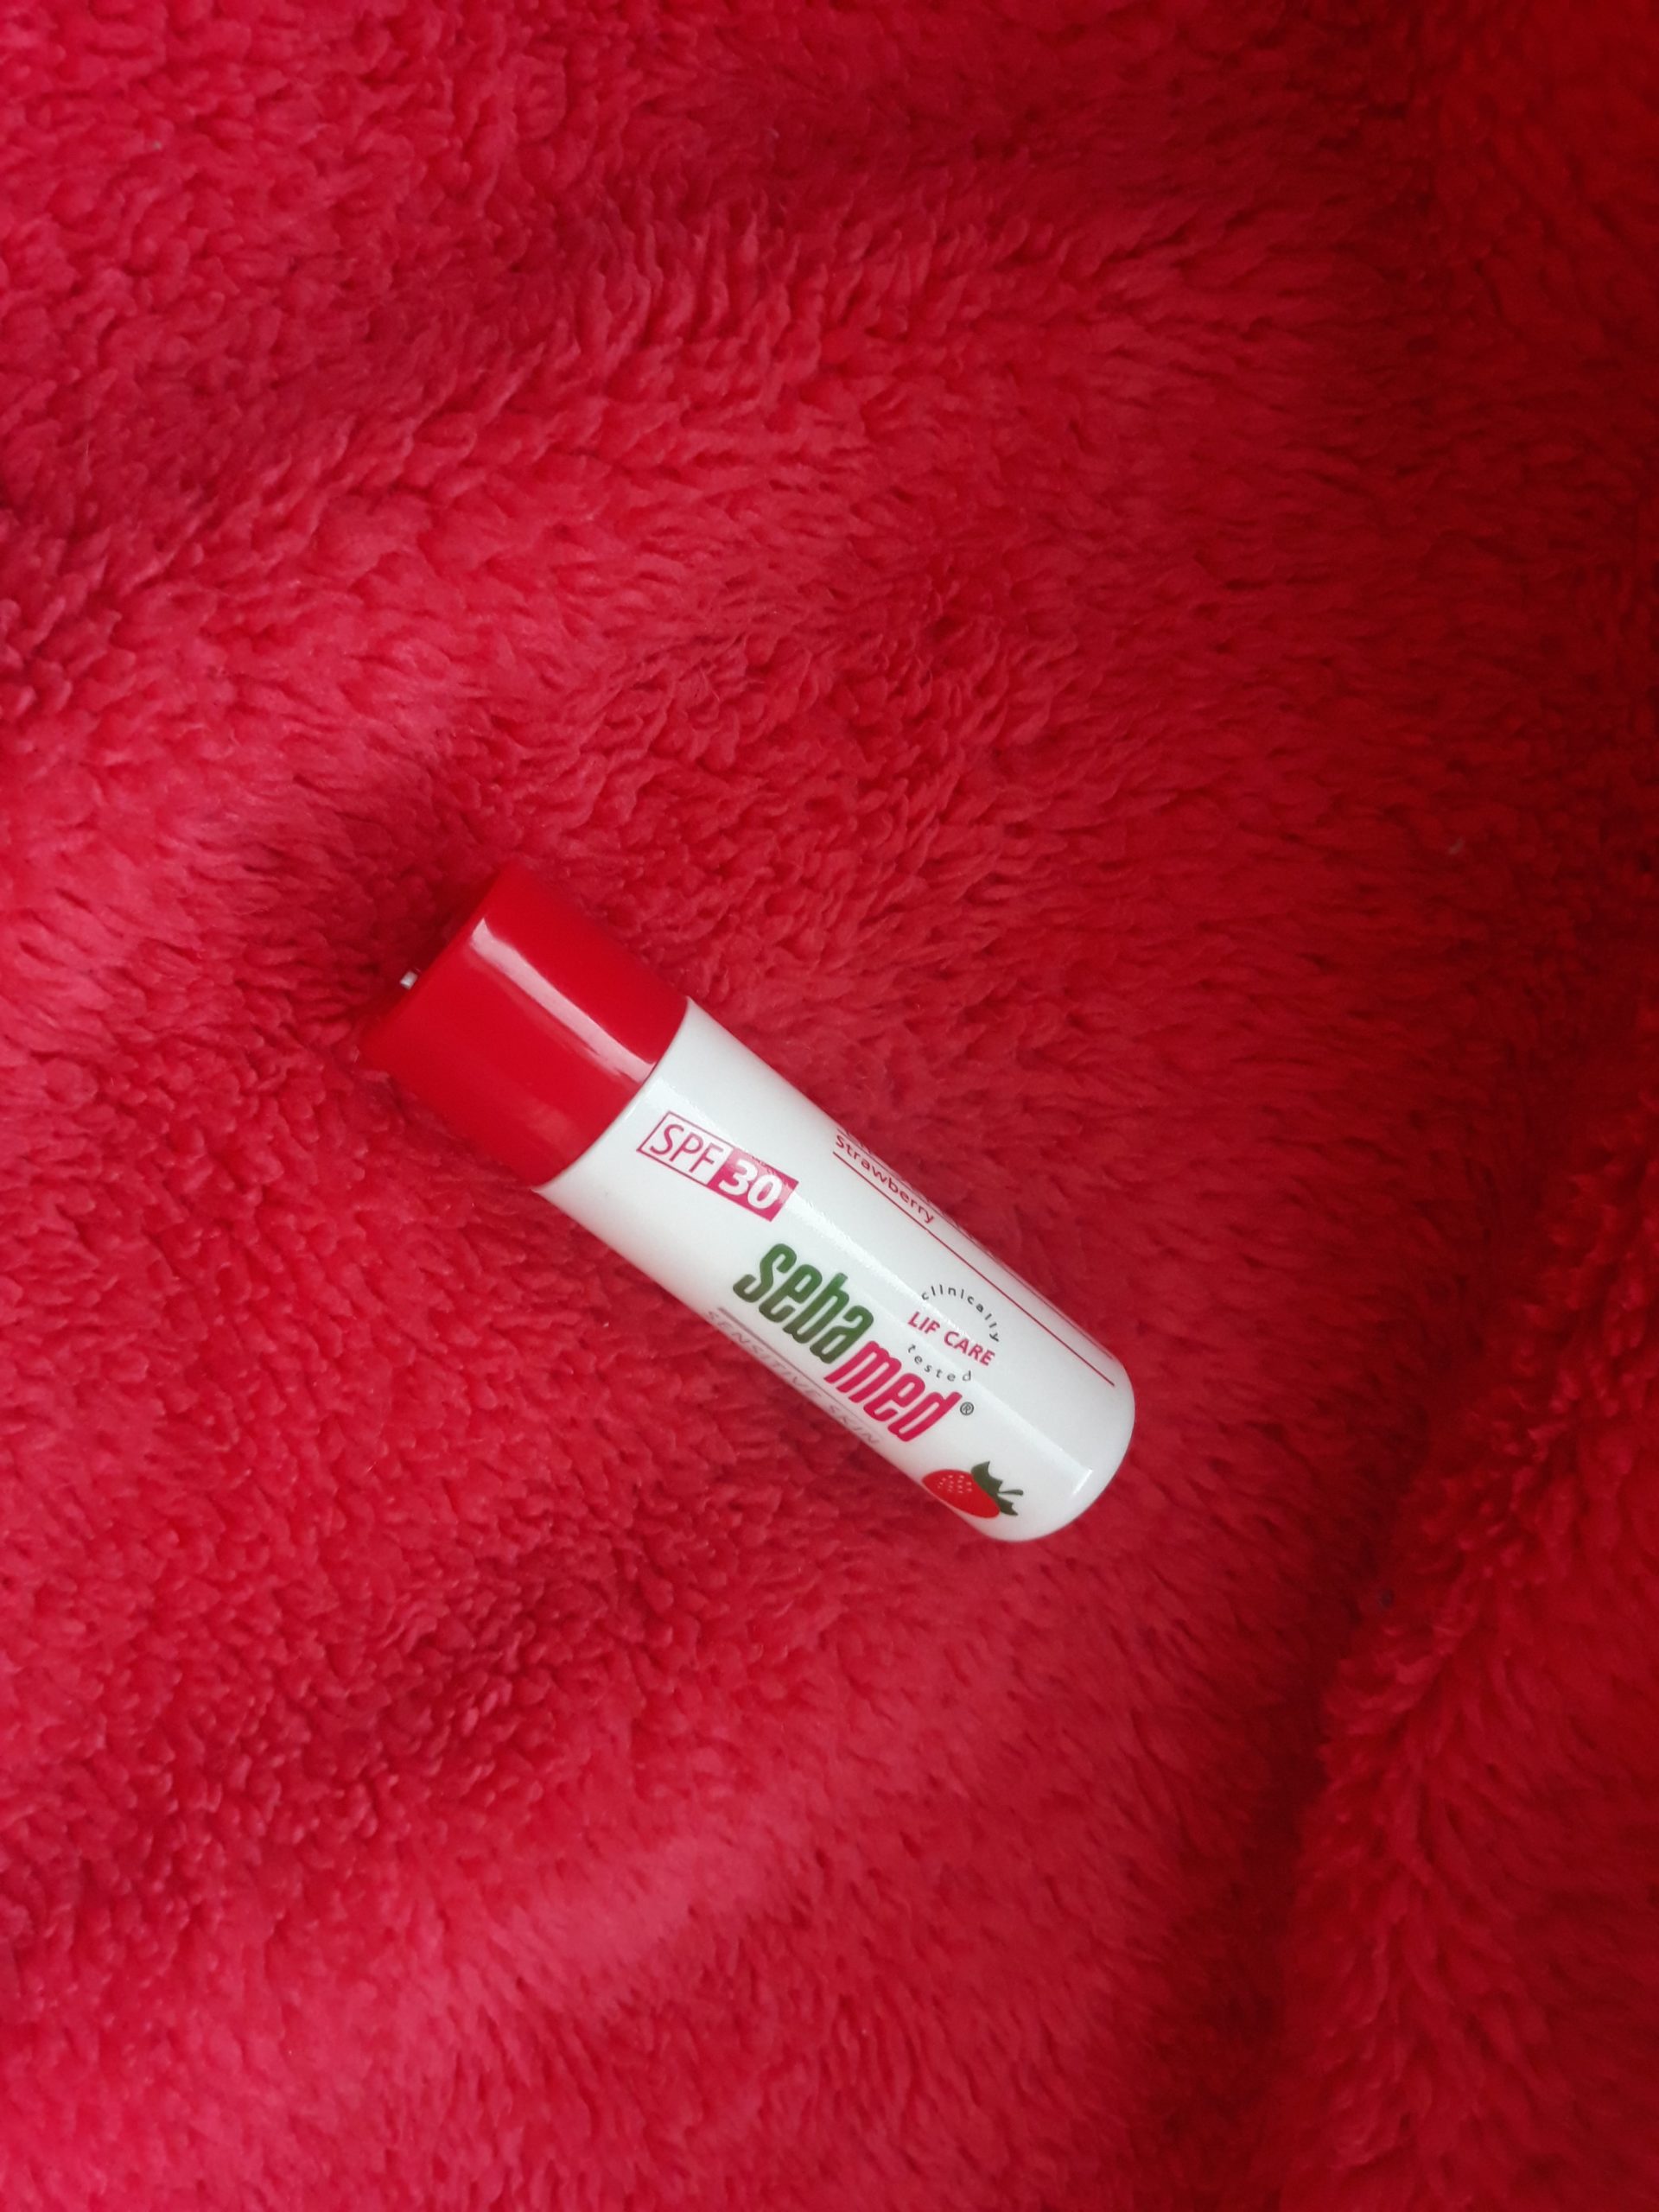 the only thing you need for your lip care routine